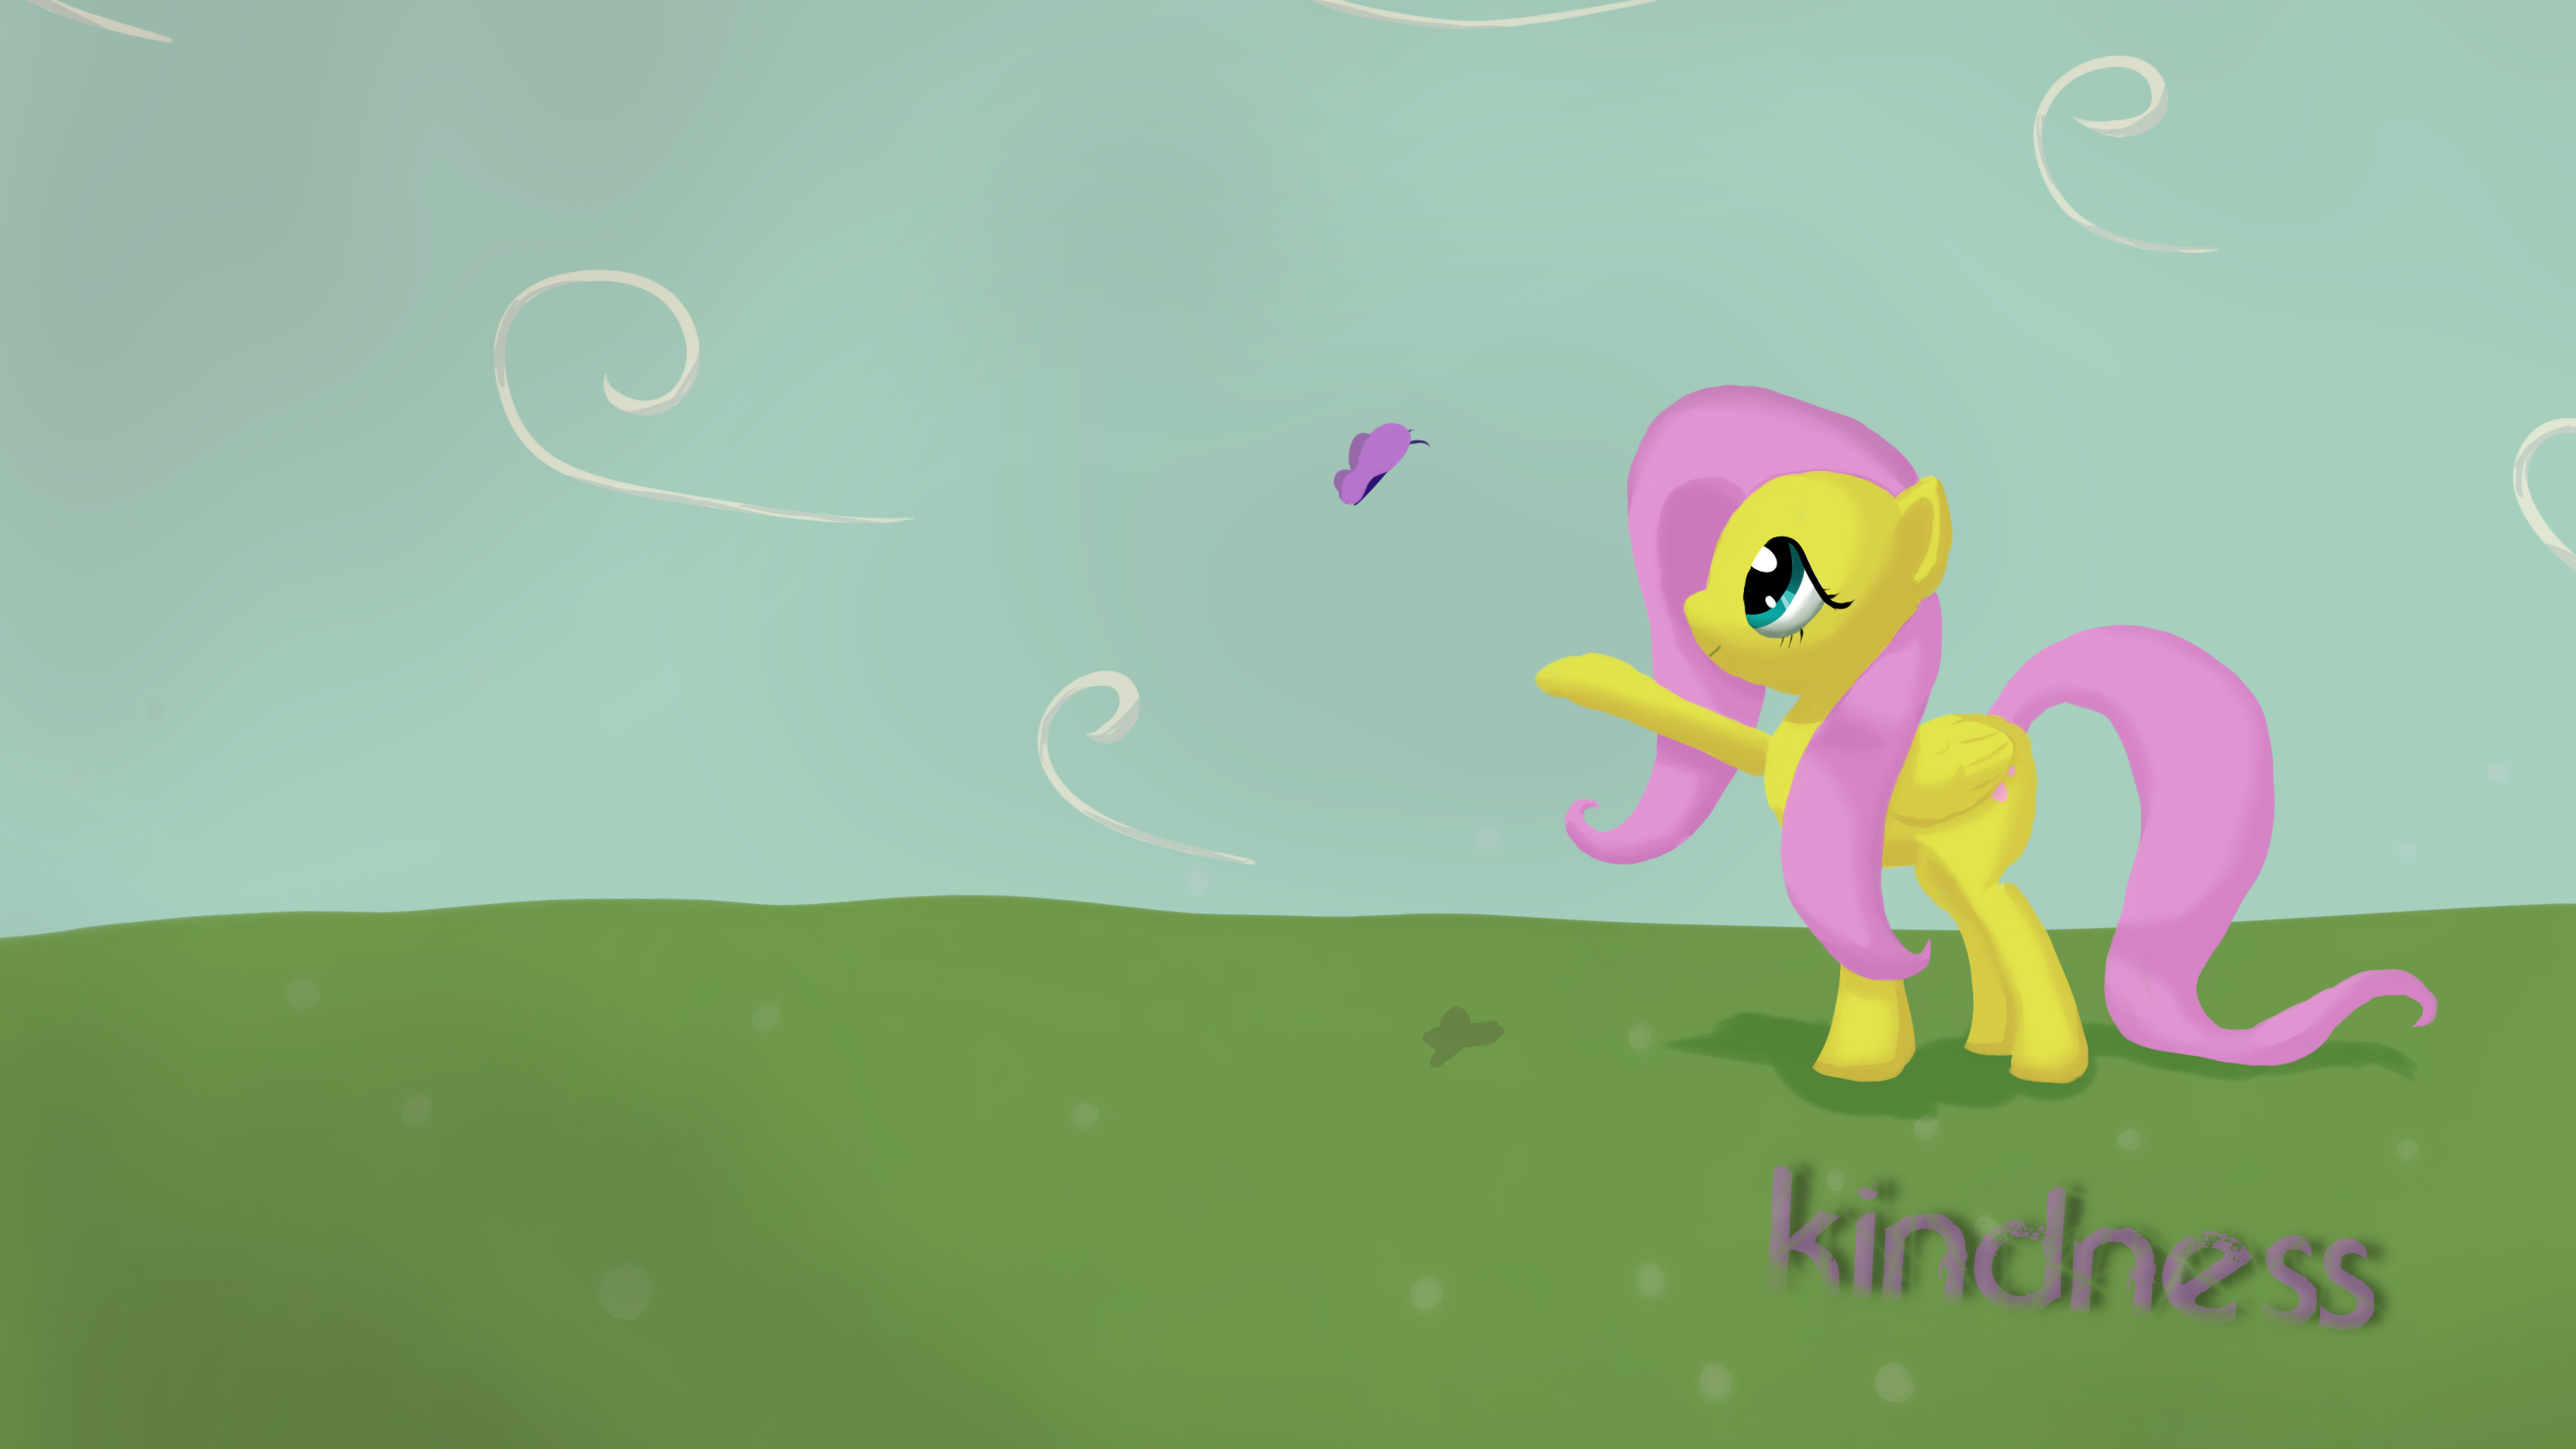 Kindness Wallpaper - 16:9 by DarkFlame75